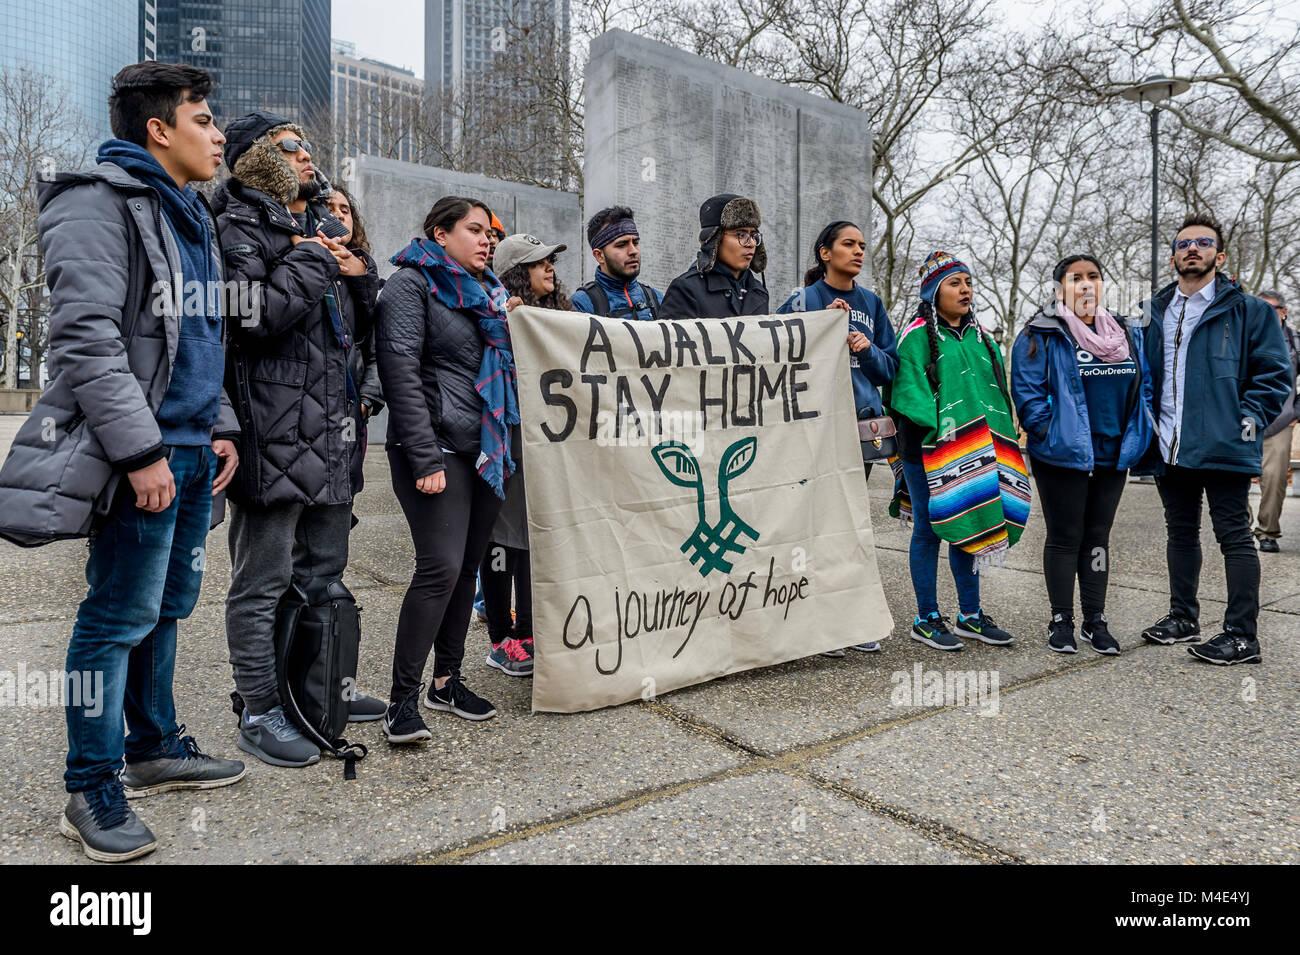 New York, United States. 15th Feb, 2018. On February 15, 2018; 11 undocumented youth and allies began The Walk to Stay Home, a 15-day walk from New York City's Battery Park to Washington, DC's Martin Luther King Jr. memorial. The 250-mile journey has been organized by the Seed Project with the support of the #OurDream Campaign to draw attention to the need for a clean Dream Act that not only grants permanent protection for undocumented youth but does not harm 11 million undocumented people living and working in the United States. Credit: Erik McGregor/Pacific Press/Alamy Live News Stock Photo